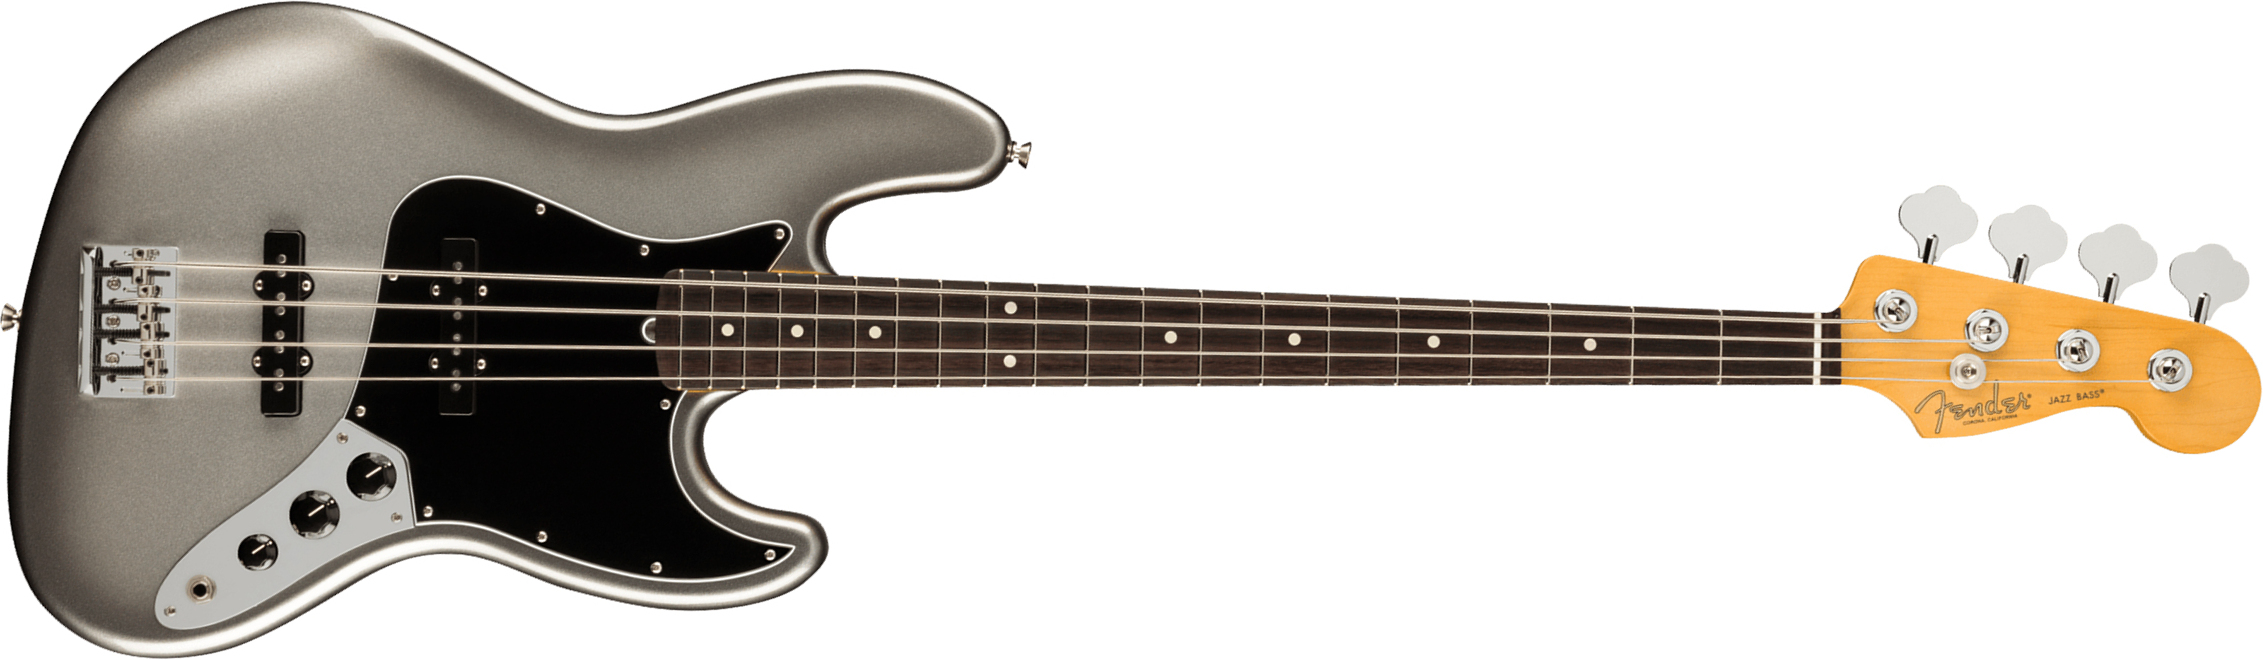 Fender Jazz Bass American Professional Ii Usa Rw - Mercury - Basse Électrique Solid Body - Main picture